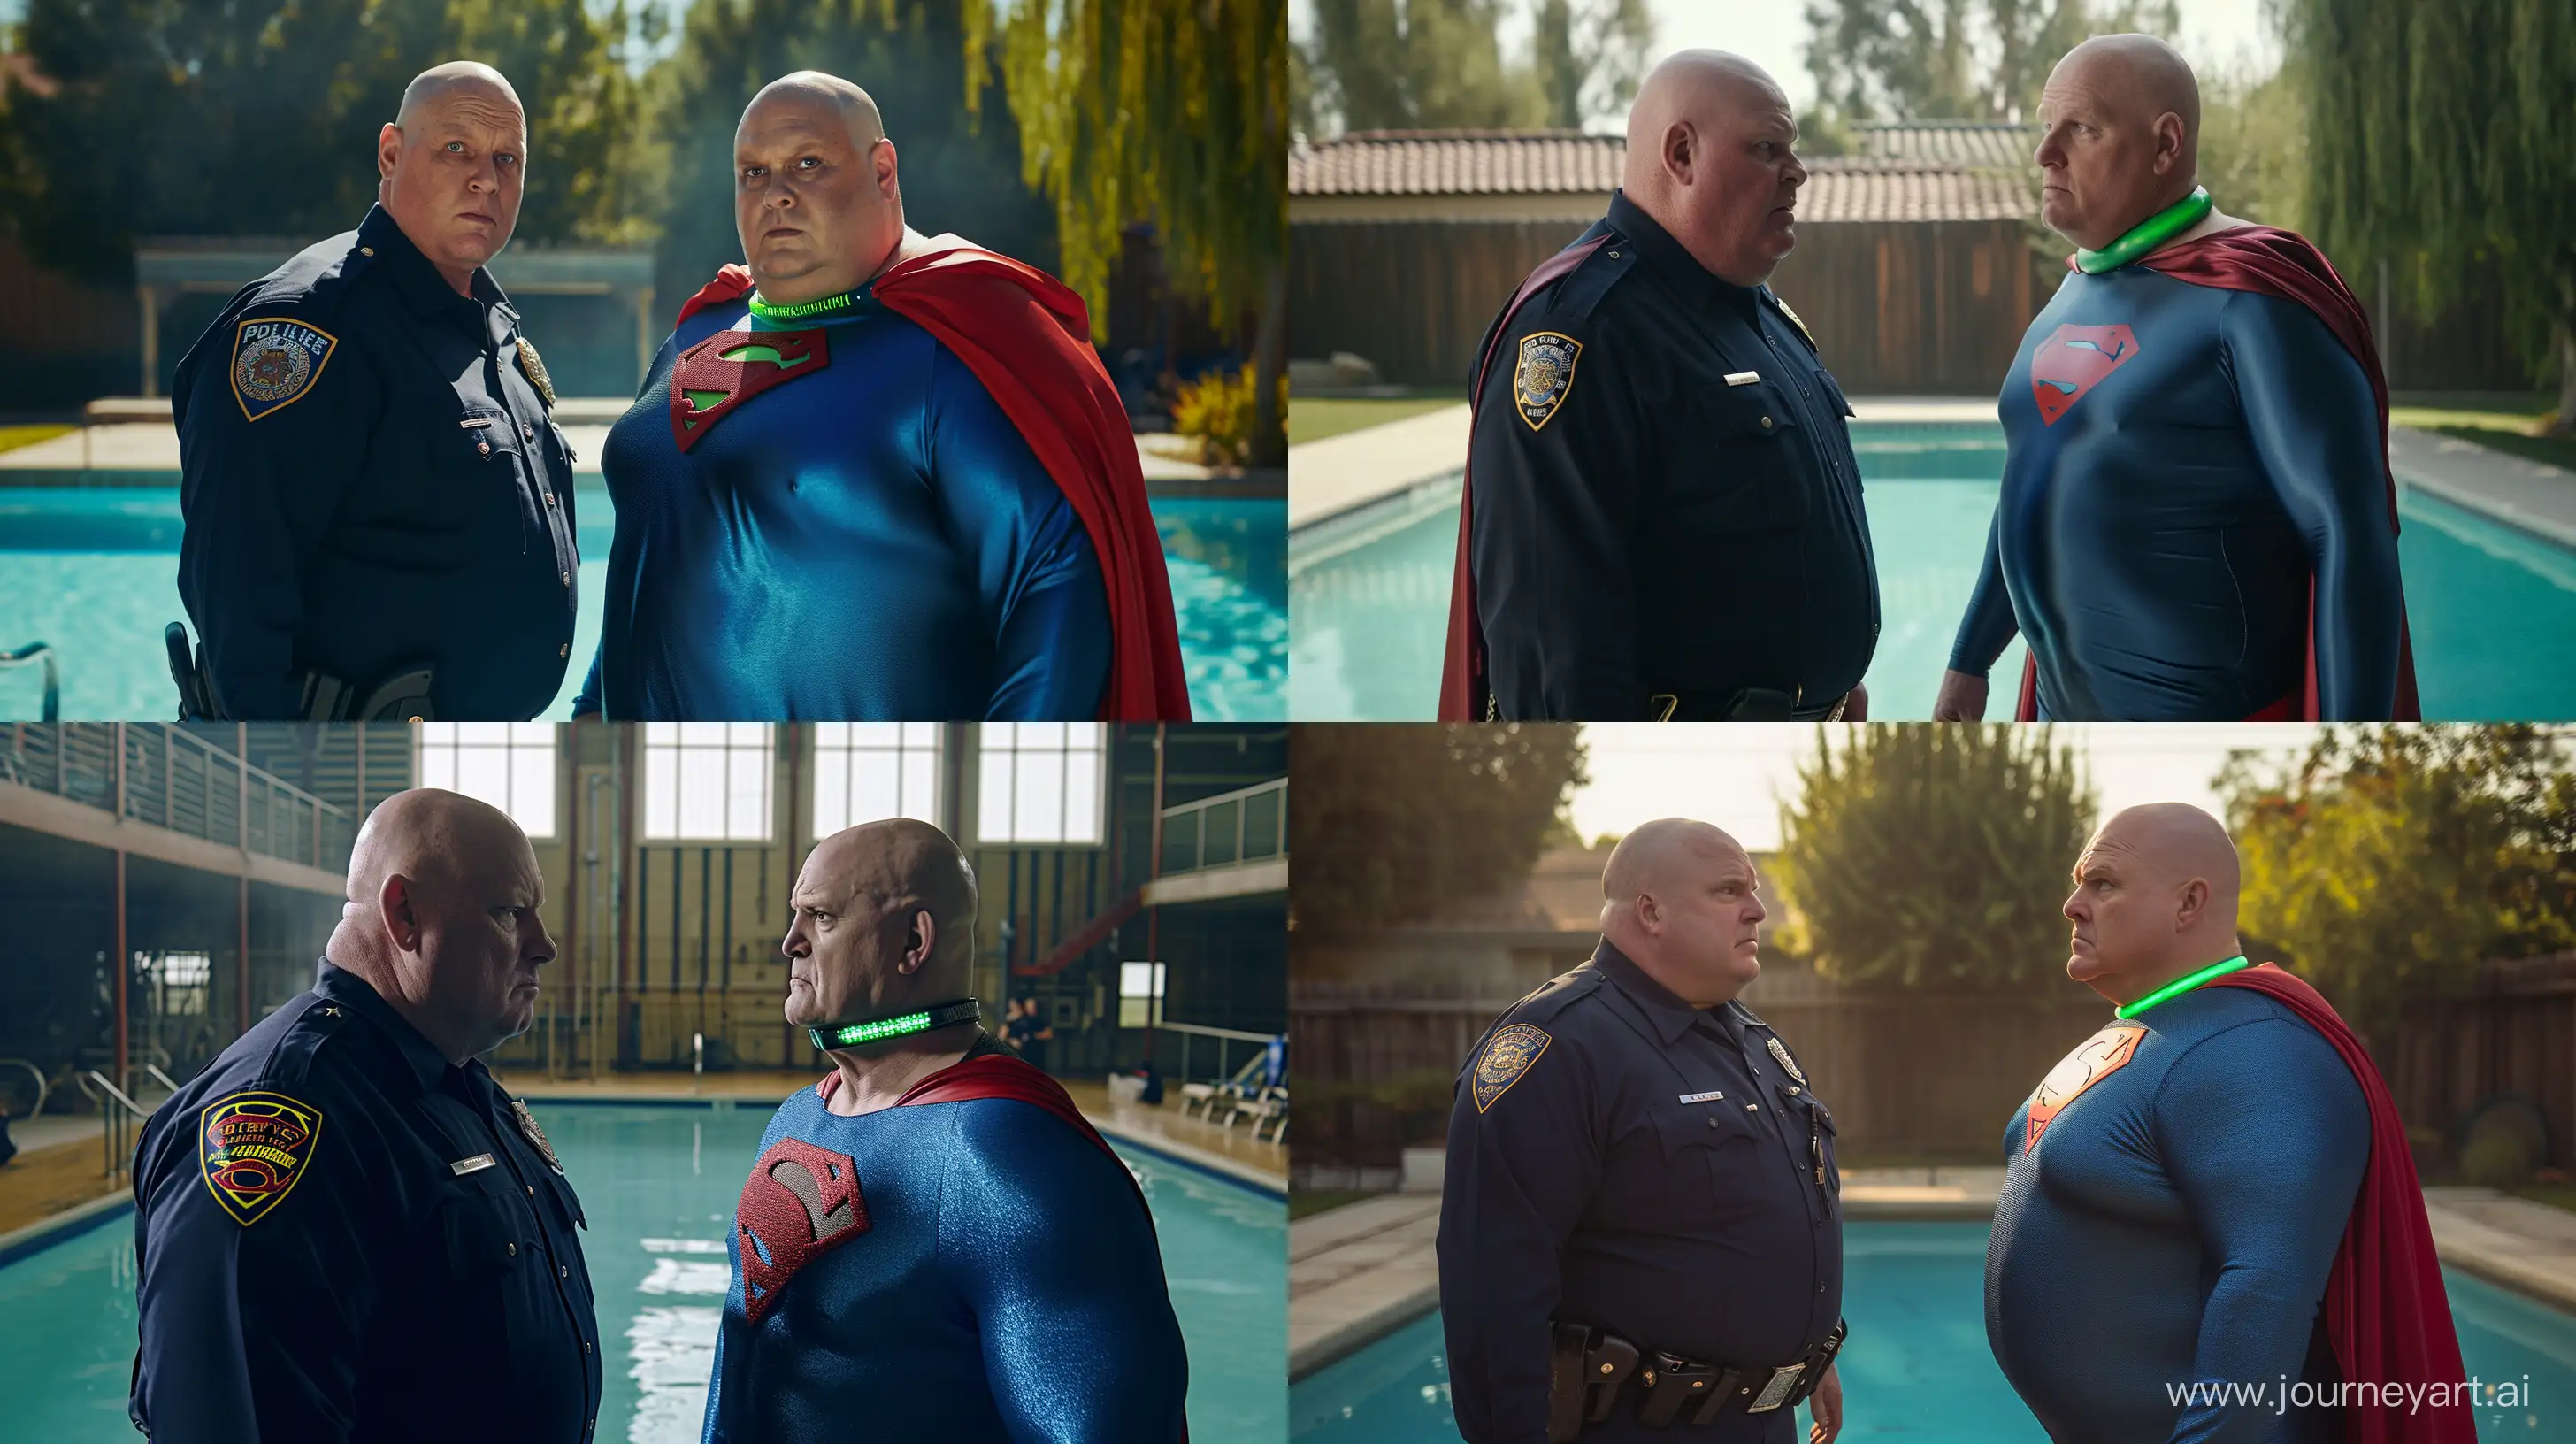 Serious-Police-Confrontation-Chubby-Men-in-Unique-Costumes-by-the-Swimming-Pool